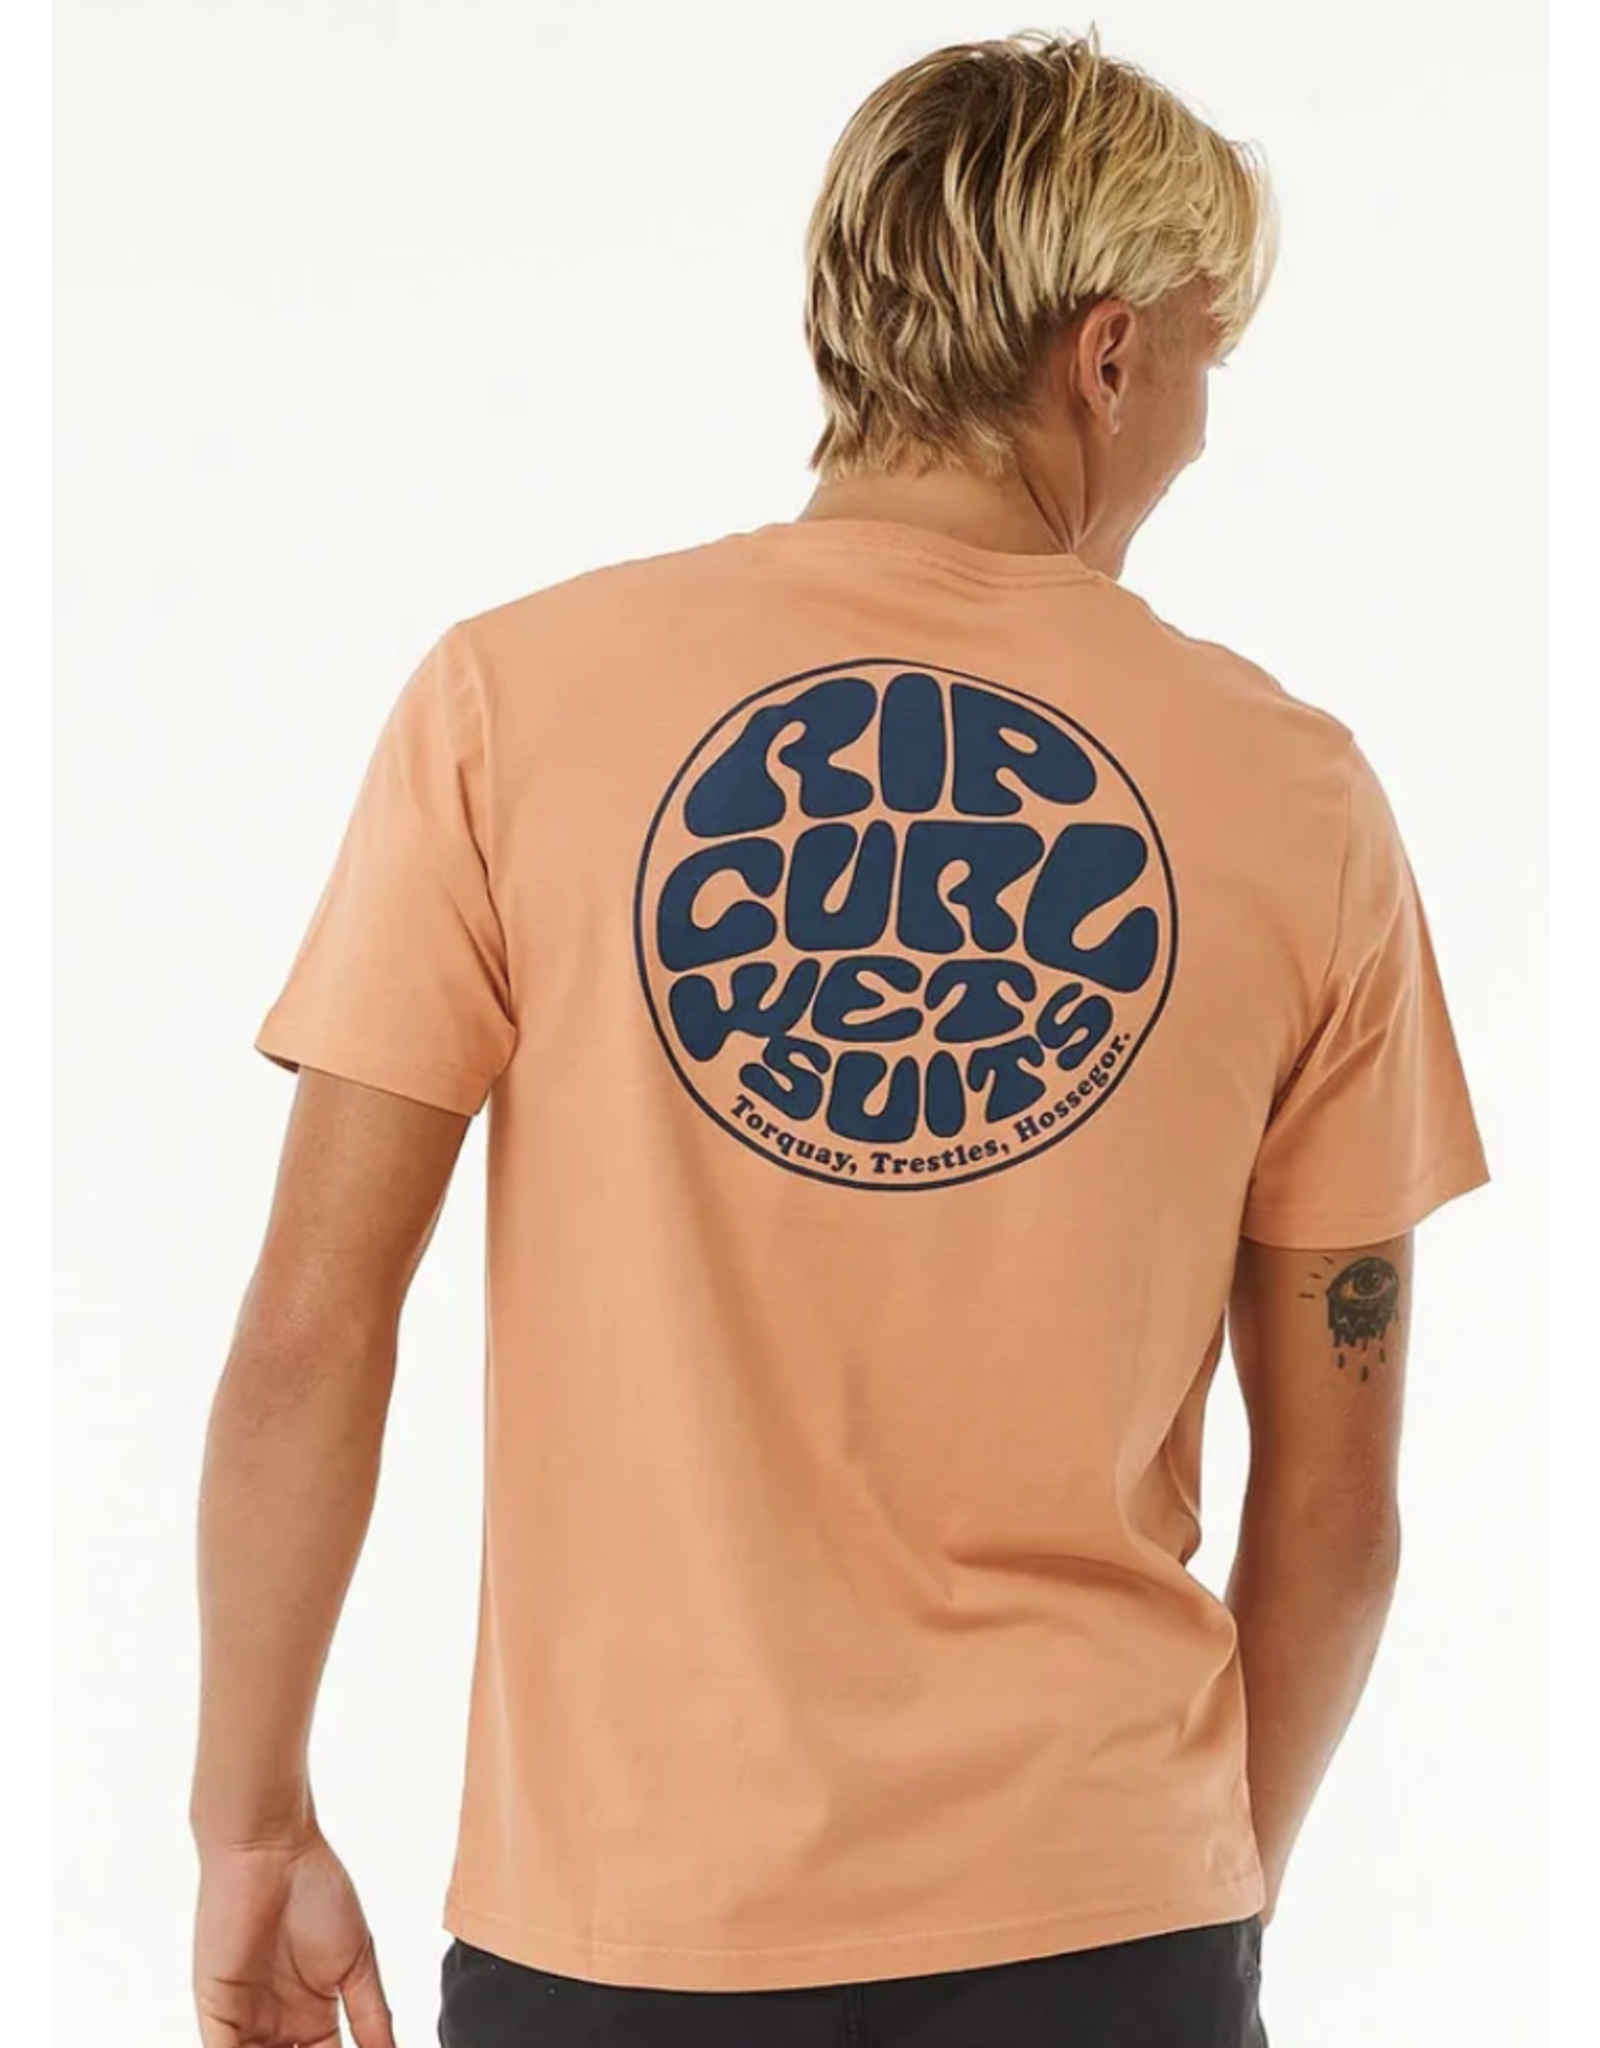 Rip Curl Rip Curl Wetsuit Icon Tee Clay